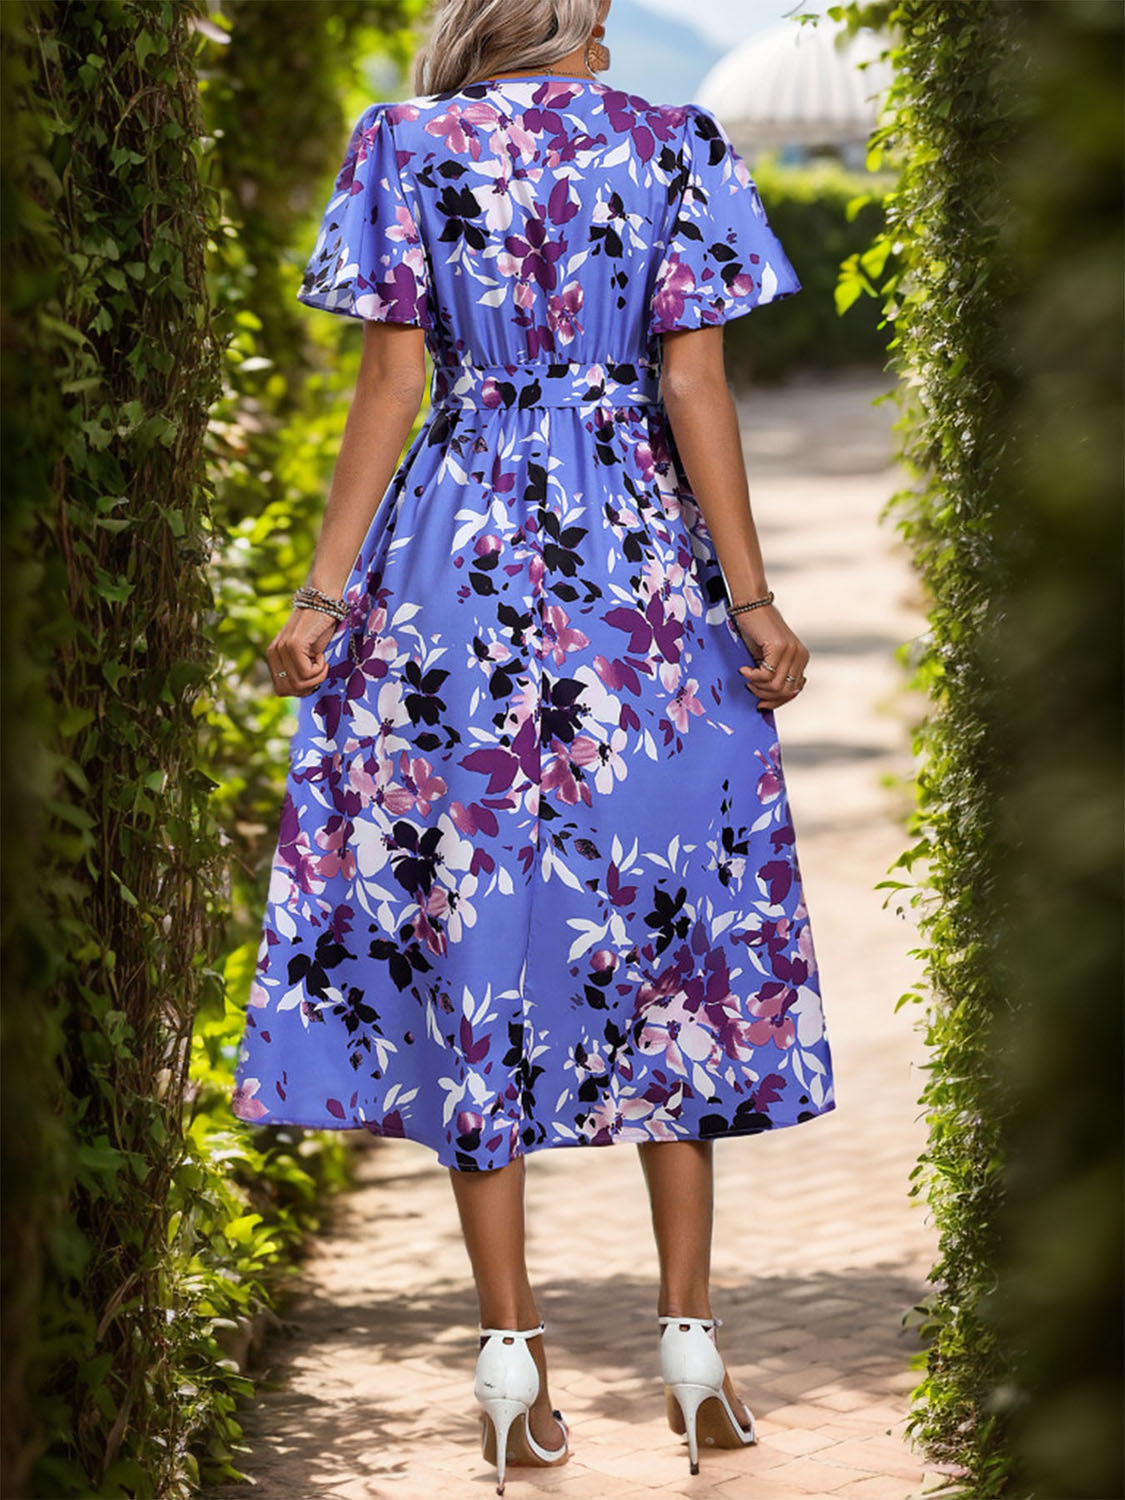 Beach Wedding Guest Dress for Women: Floral Surplice Midi with High-Low Hem and Short Sleeves